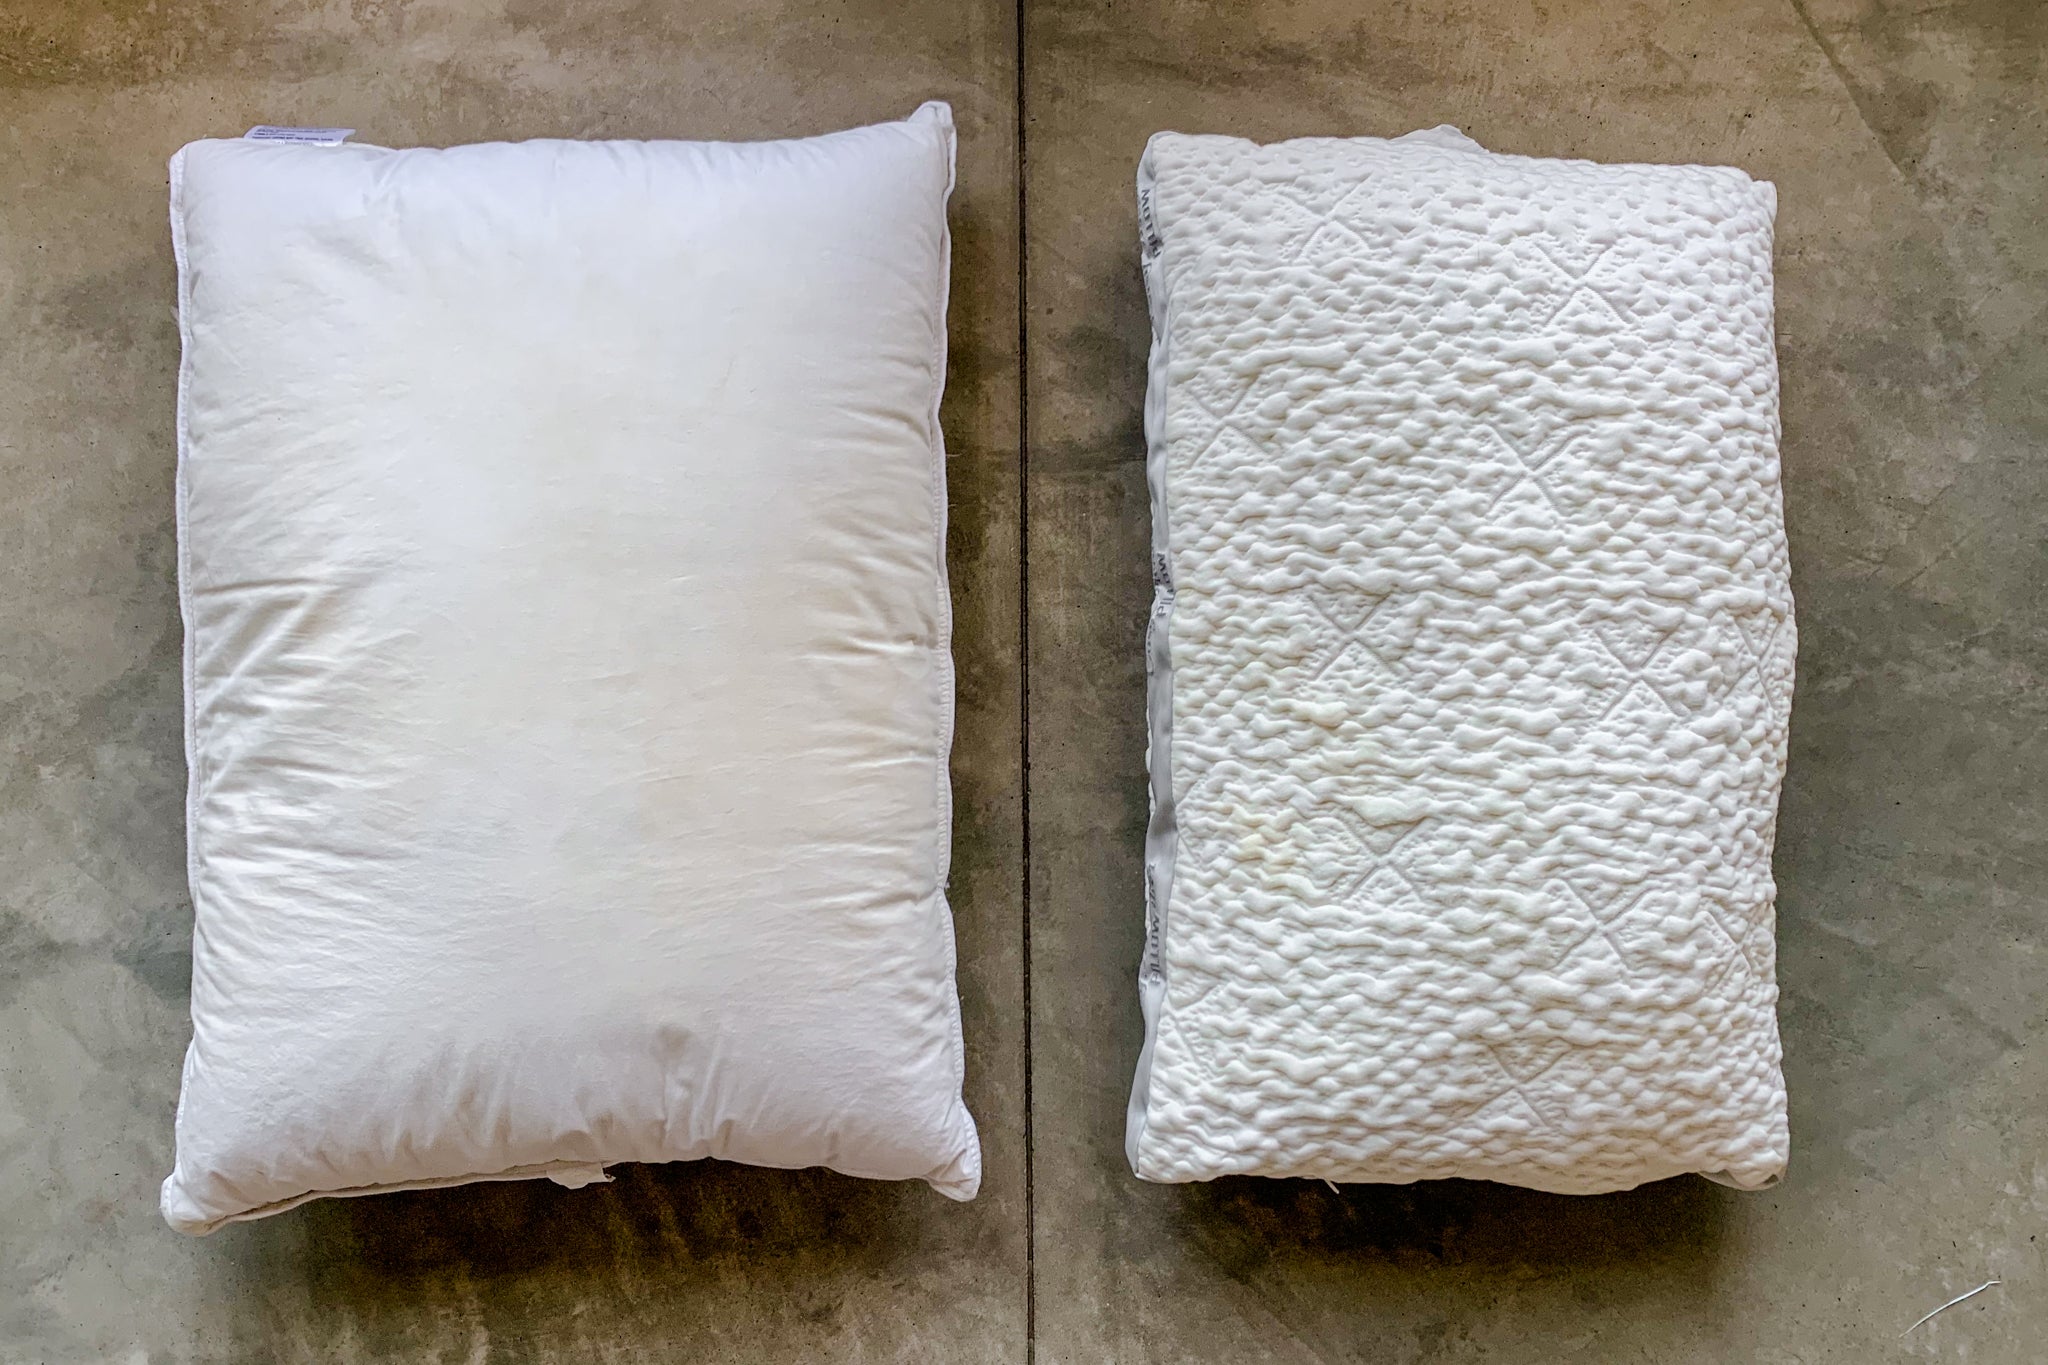 How to wash pillows?